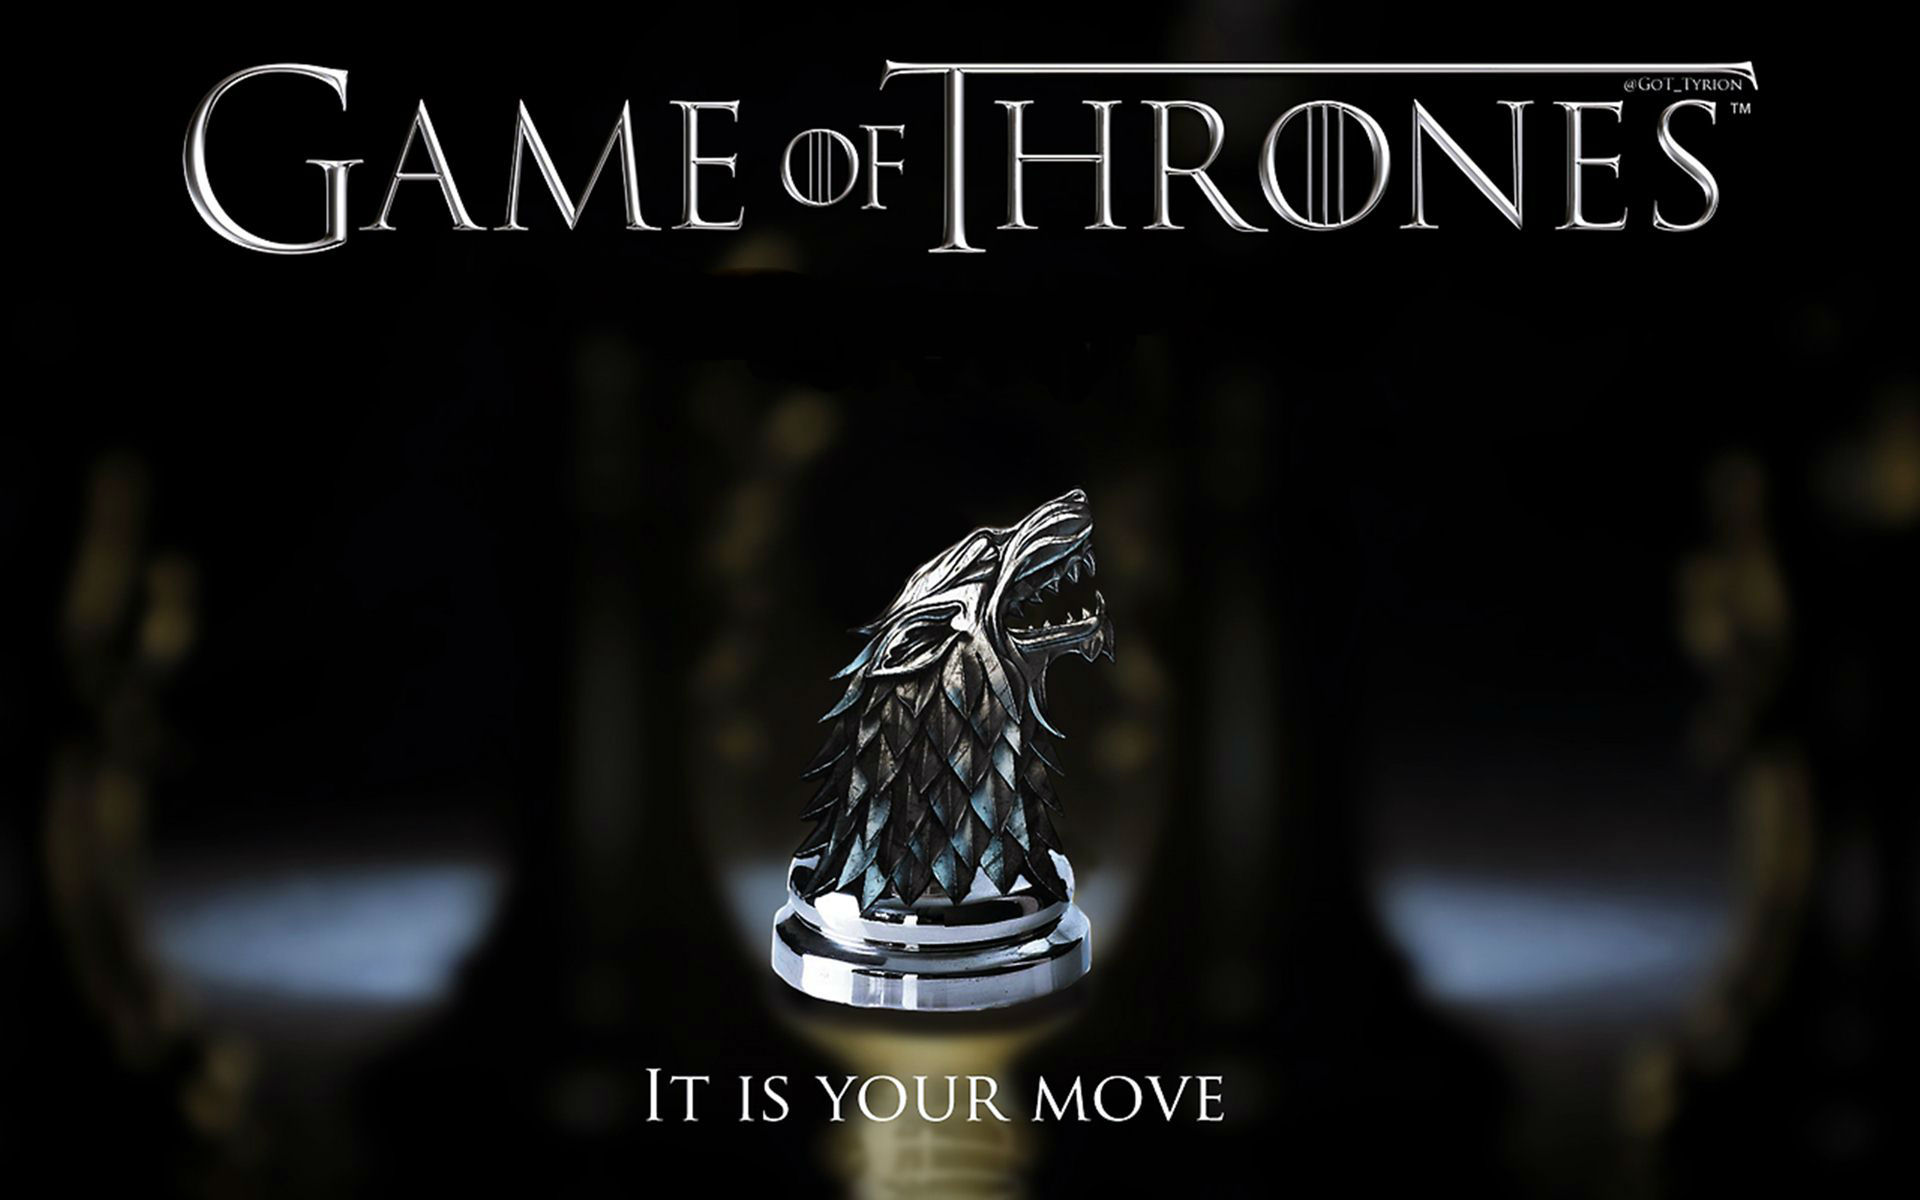 Its-your-move-Game-of-Thrones-ep